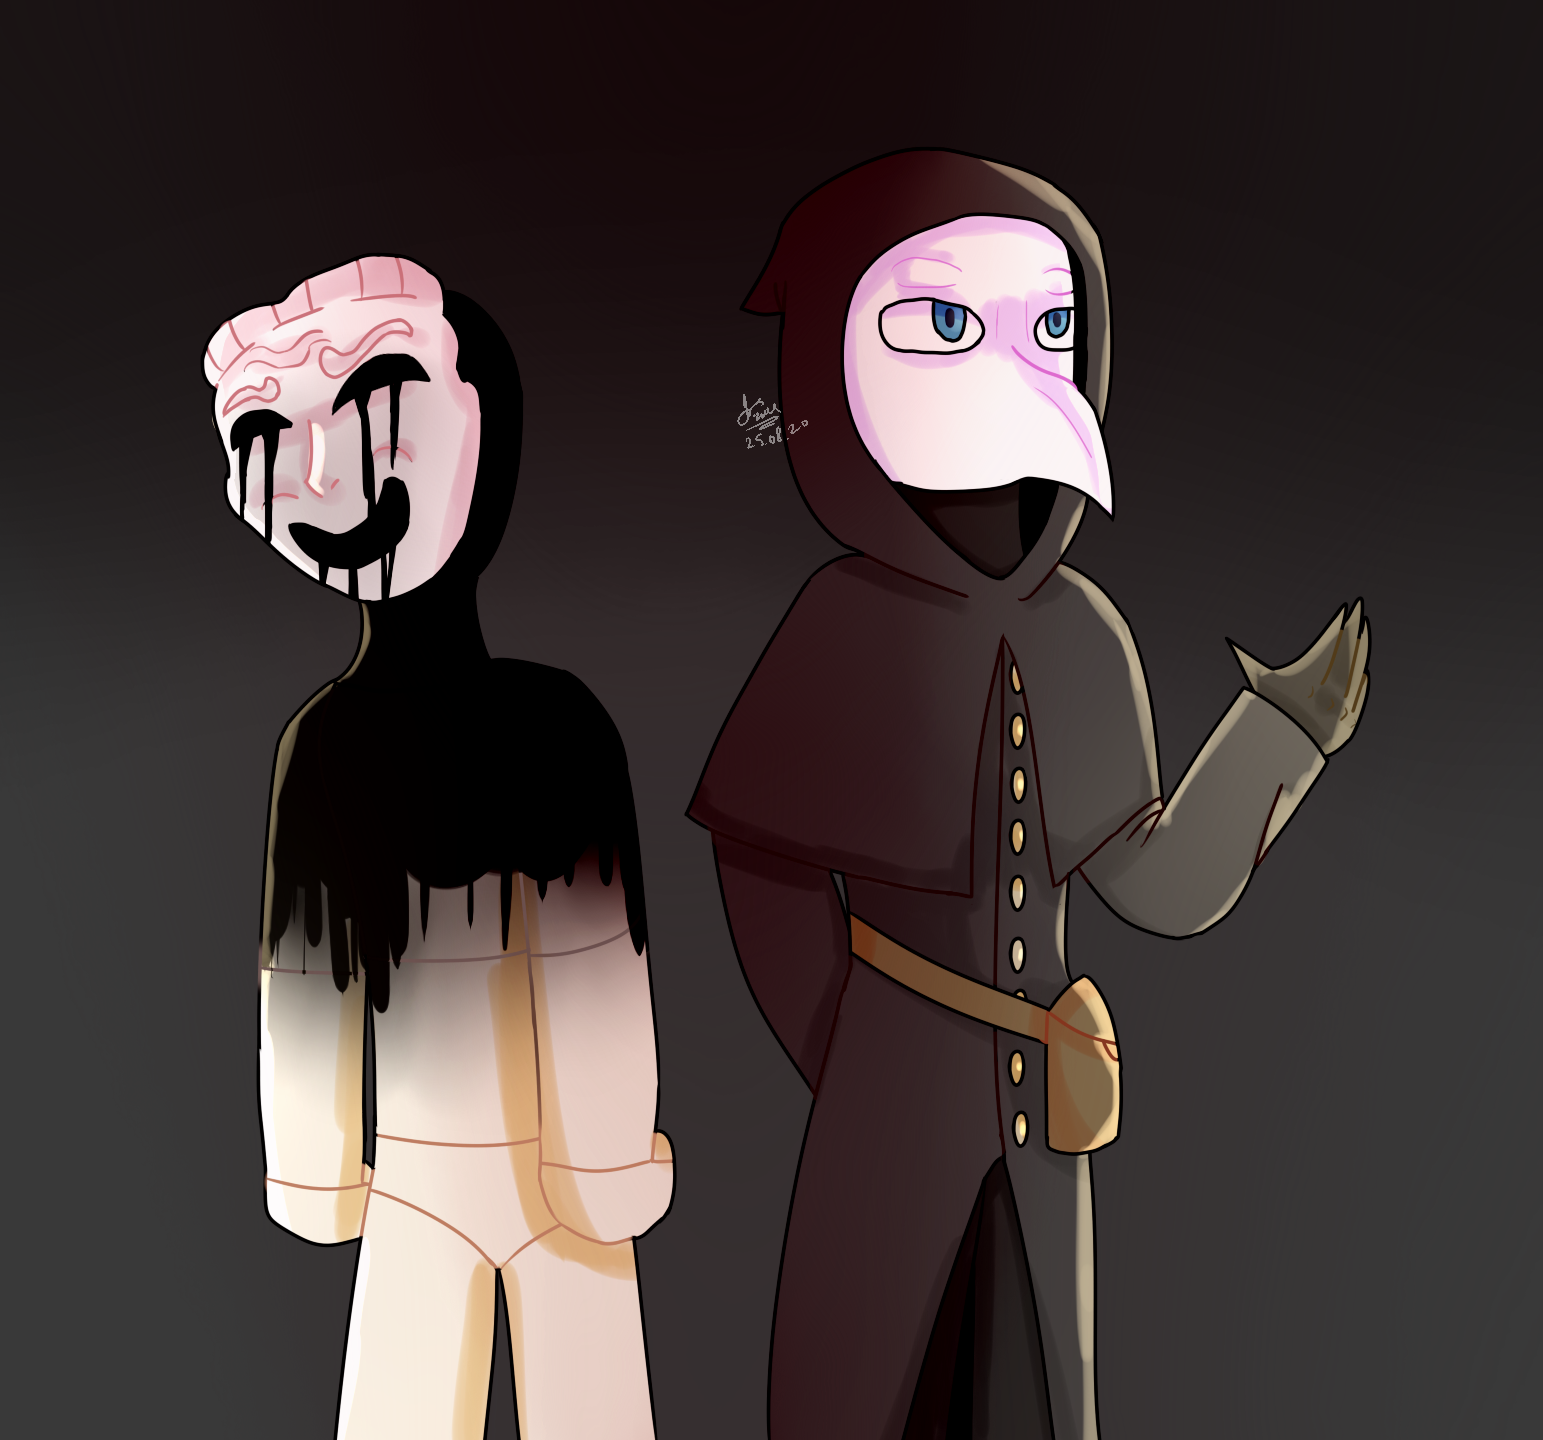 Scp-007 And 049  SCP Foundation Amino